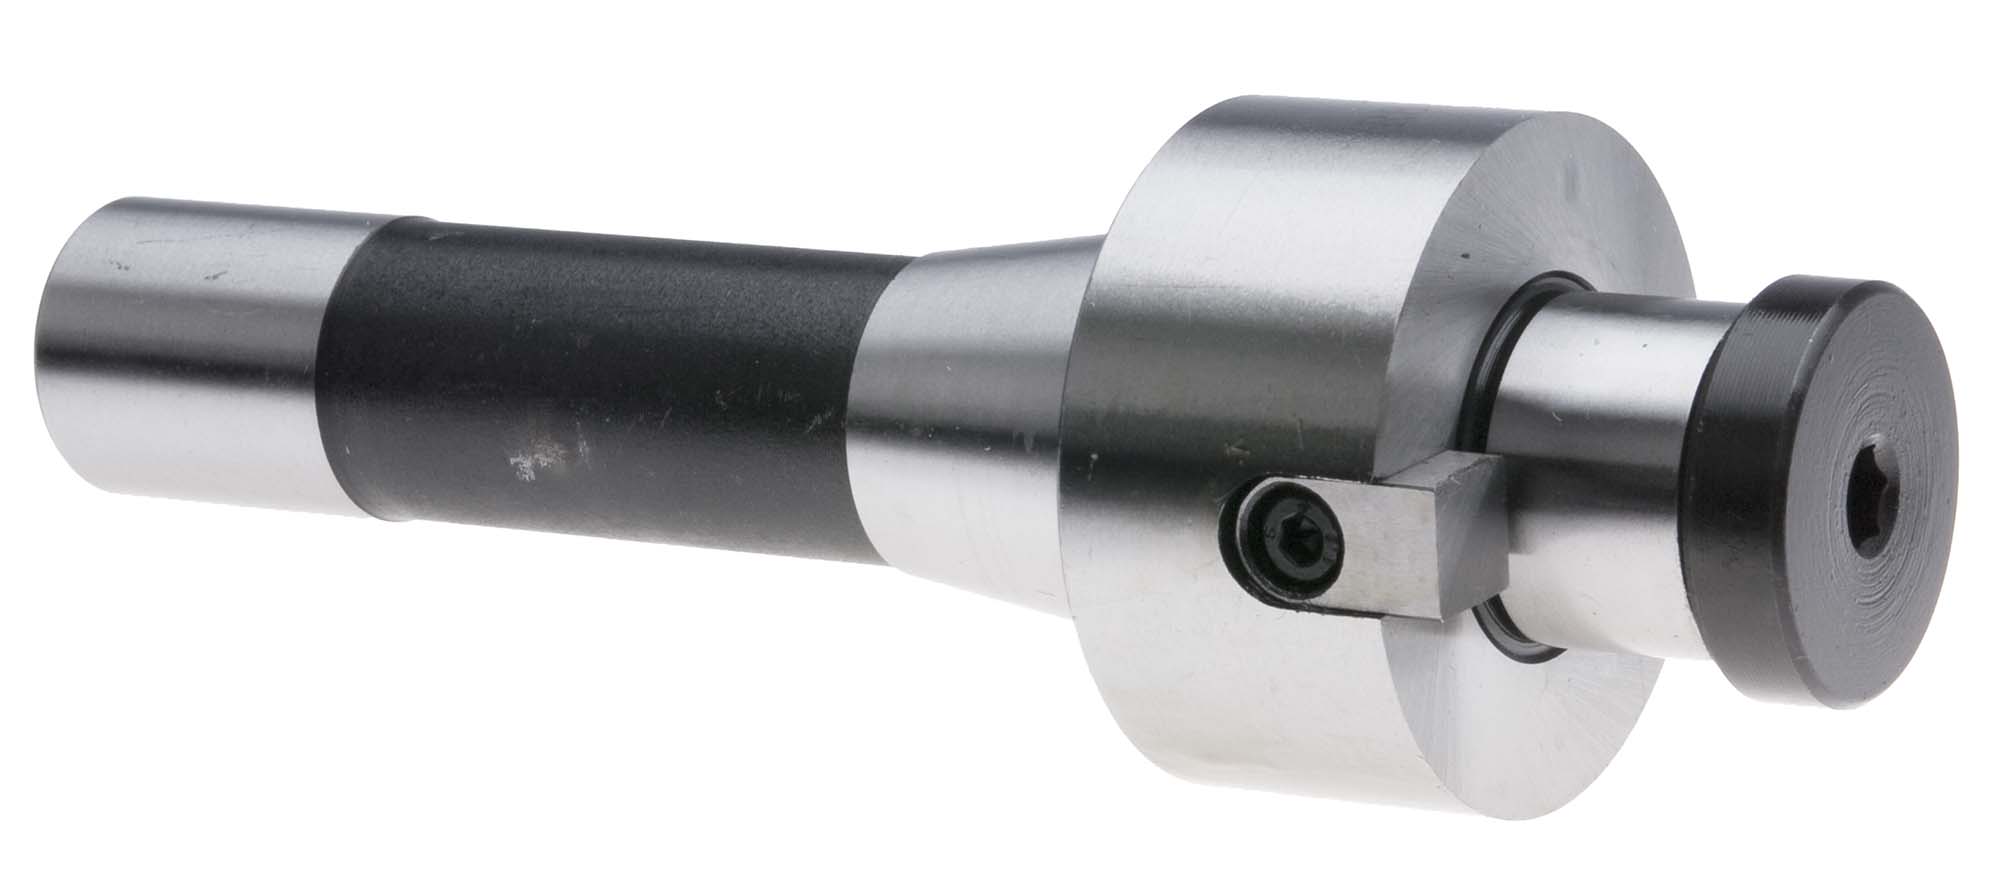 1" R8 Shell End Mill Arbor